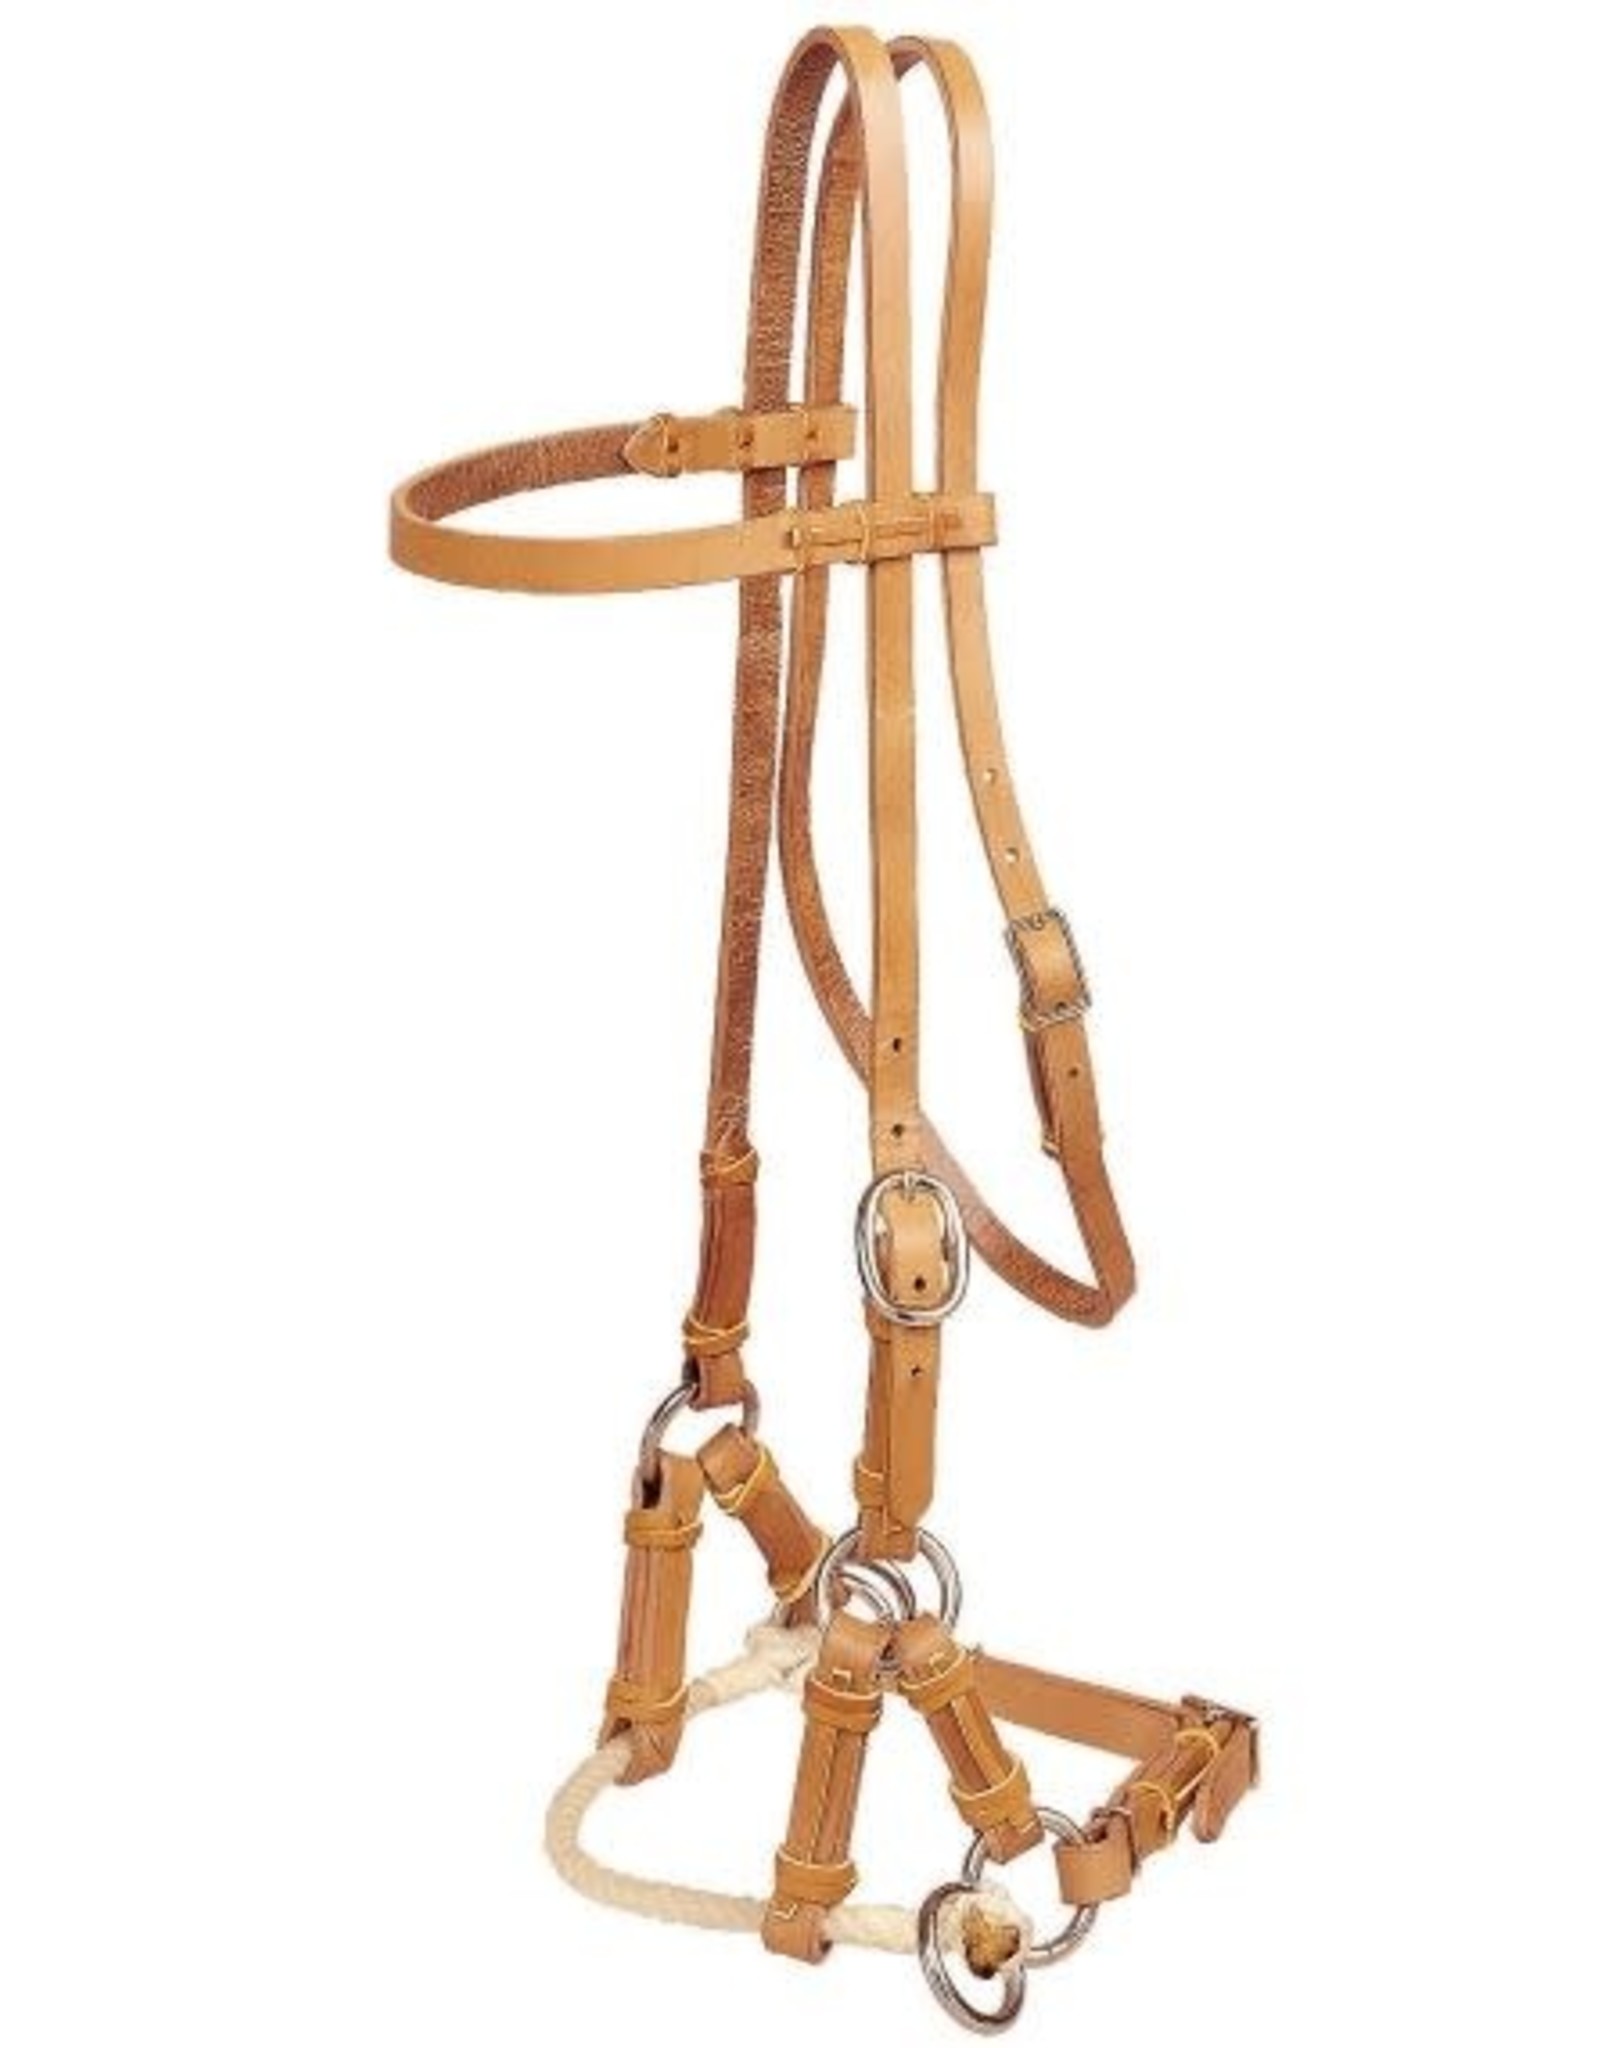 Tory Tory Performance Headstall Side Pull